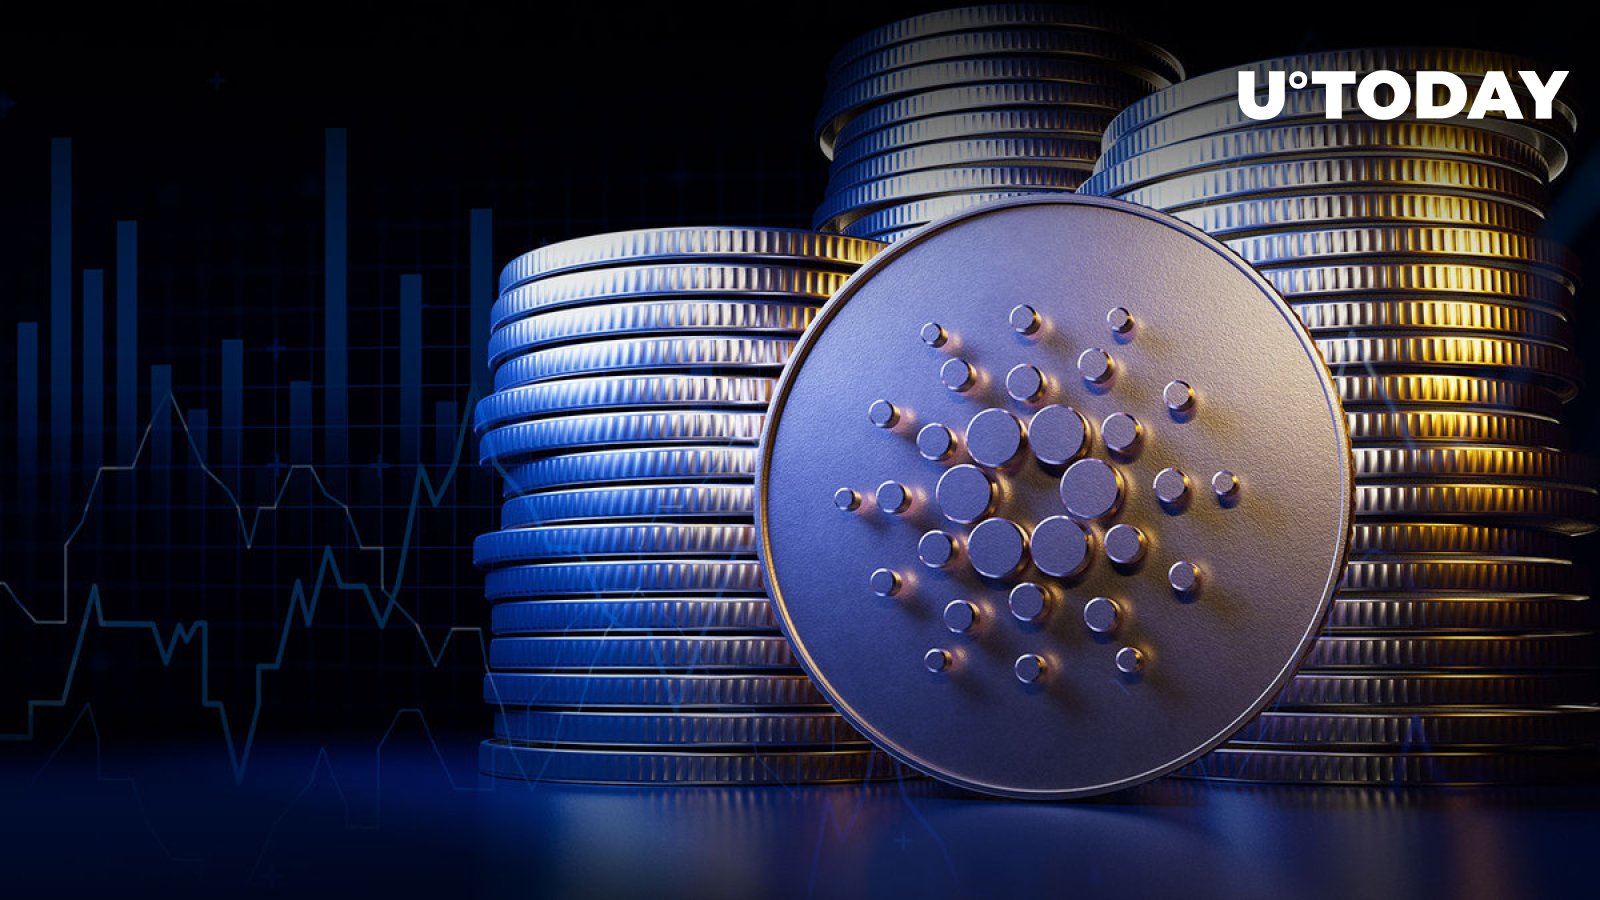 Cardano Becomes Third Largest Protocol on This Platform